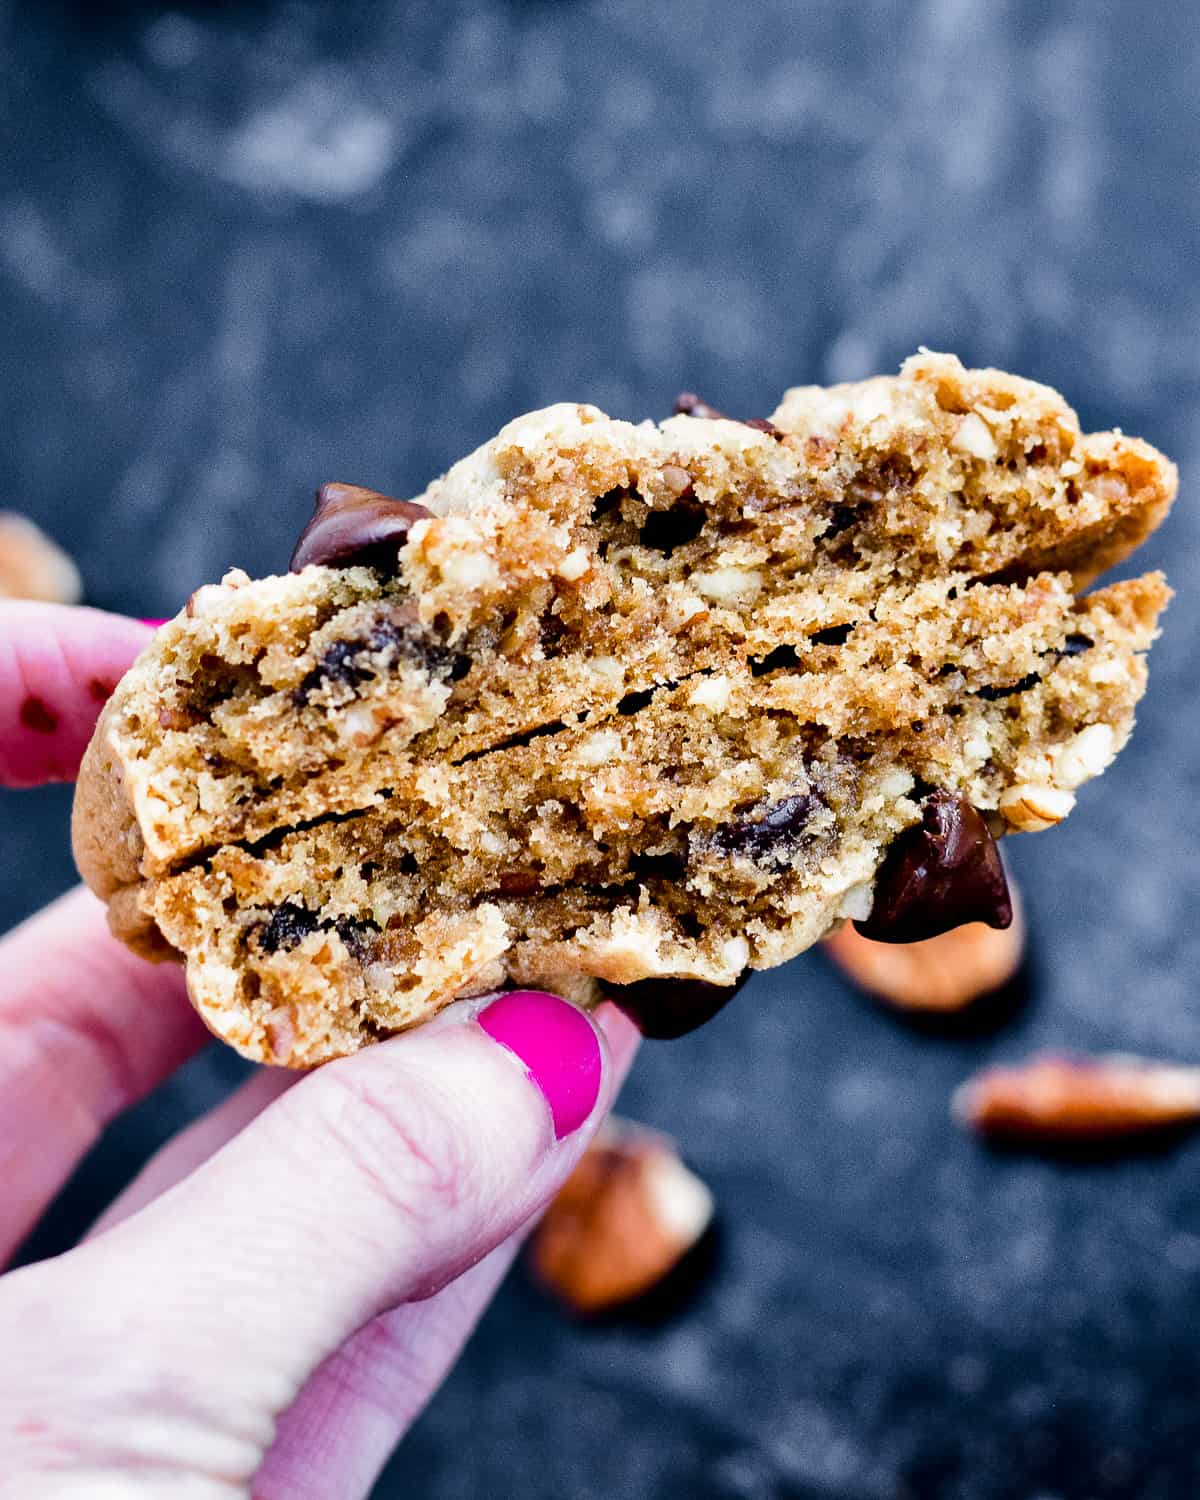 Hand holding a broken chocolate chip and pecan cookie.